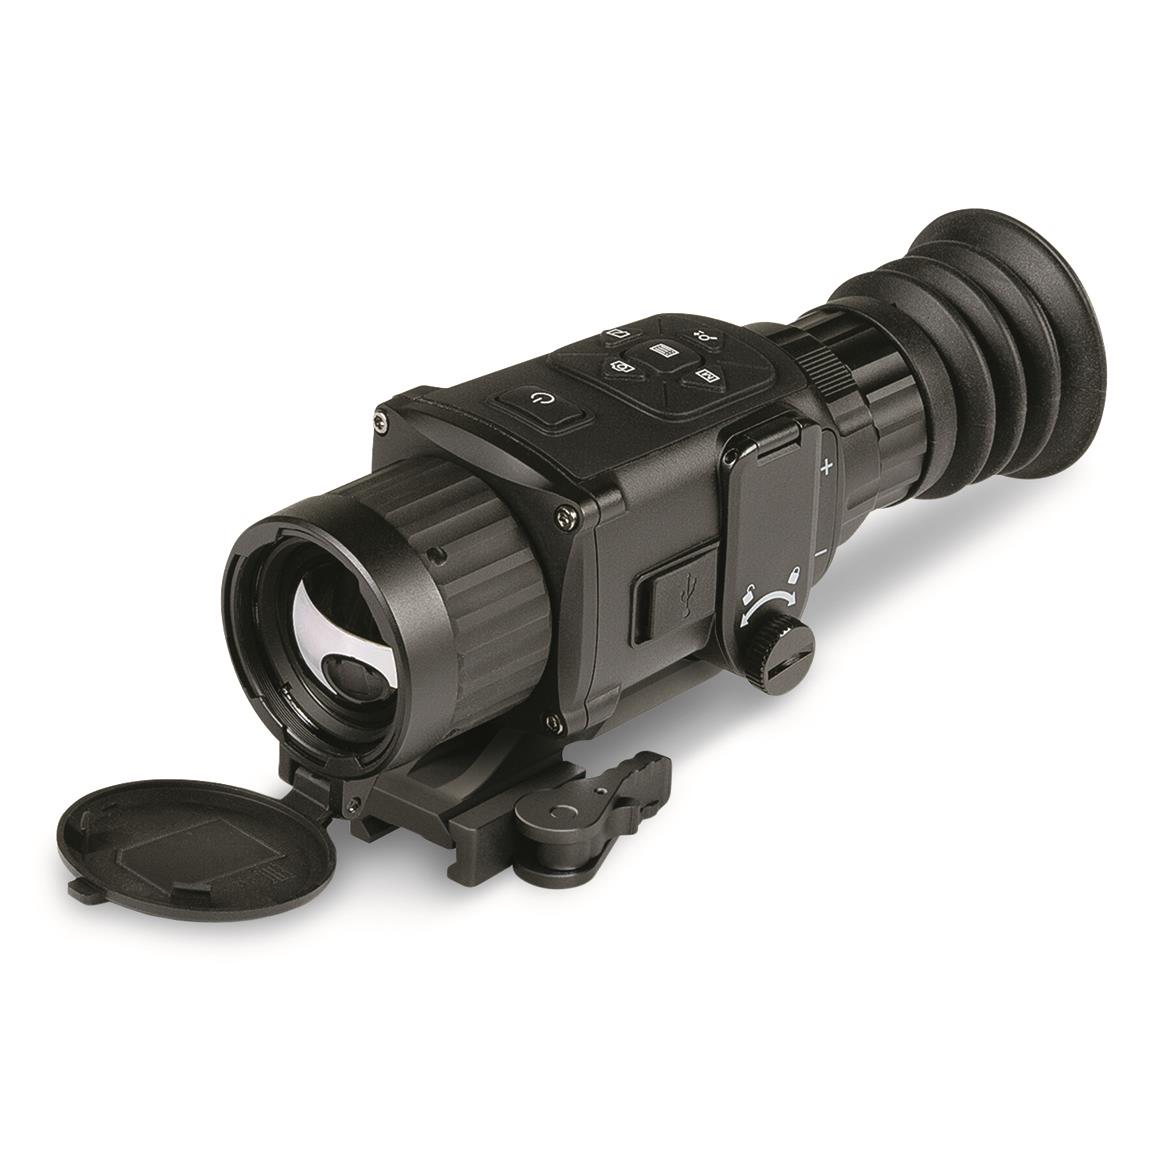 AGM Rattler TS25-384 1.5x25mm Compact Thermal Imaging Rifle Scope